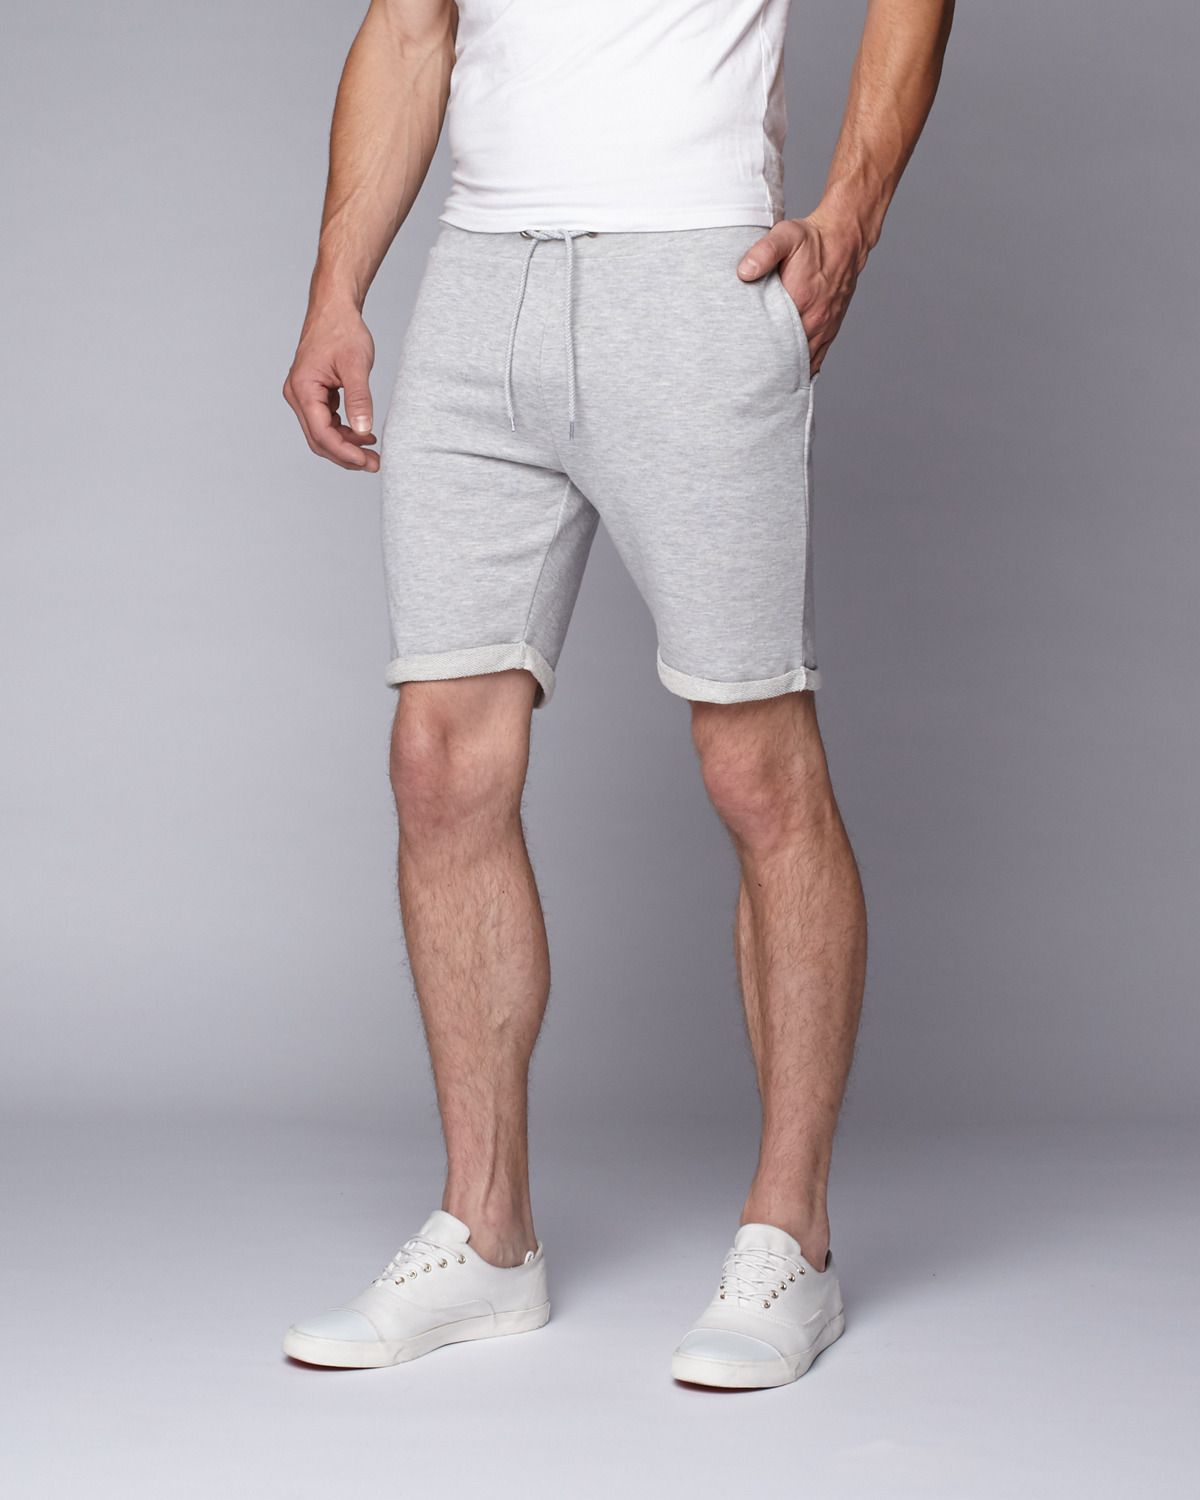 How To Wear Grey Sweat Shorts